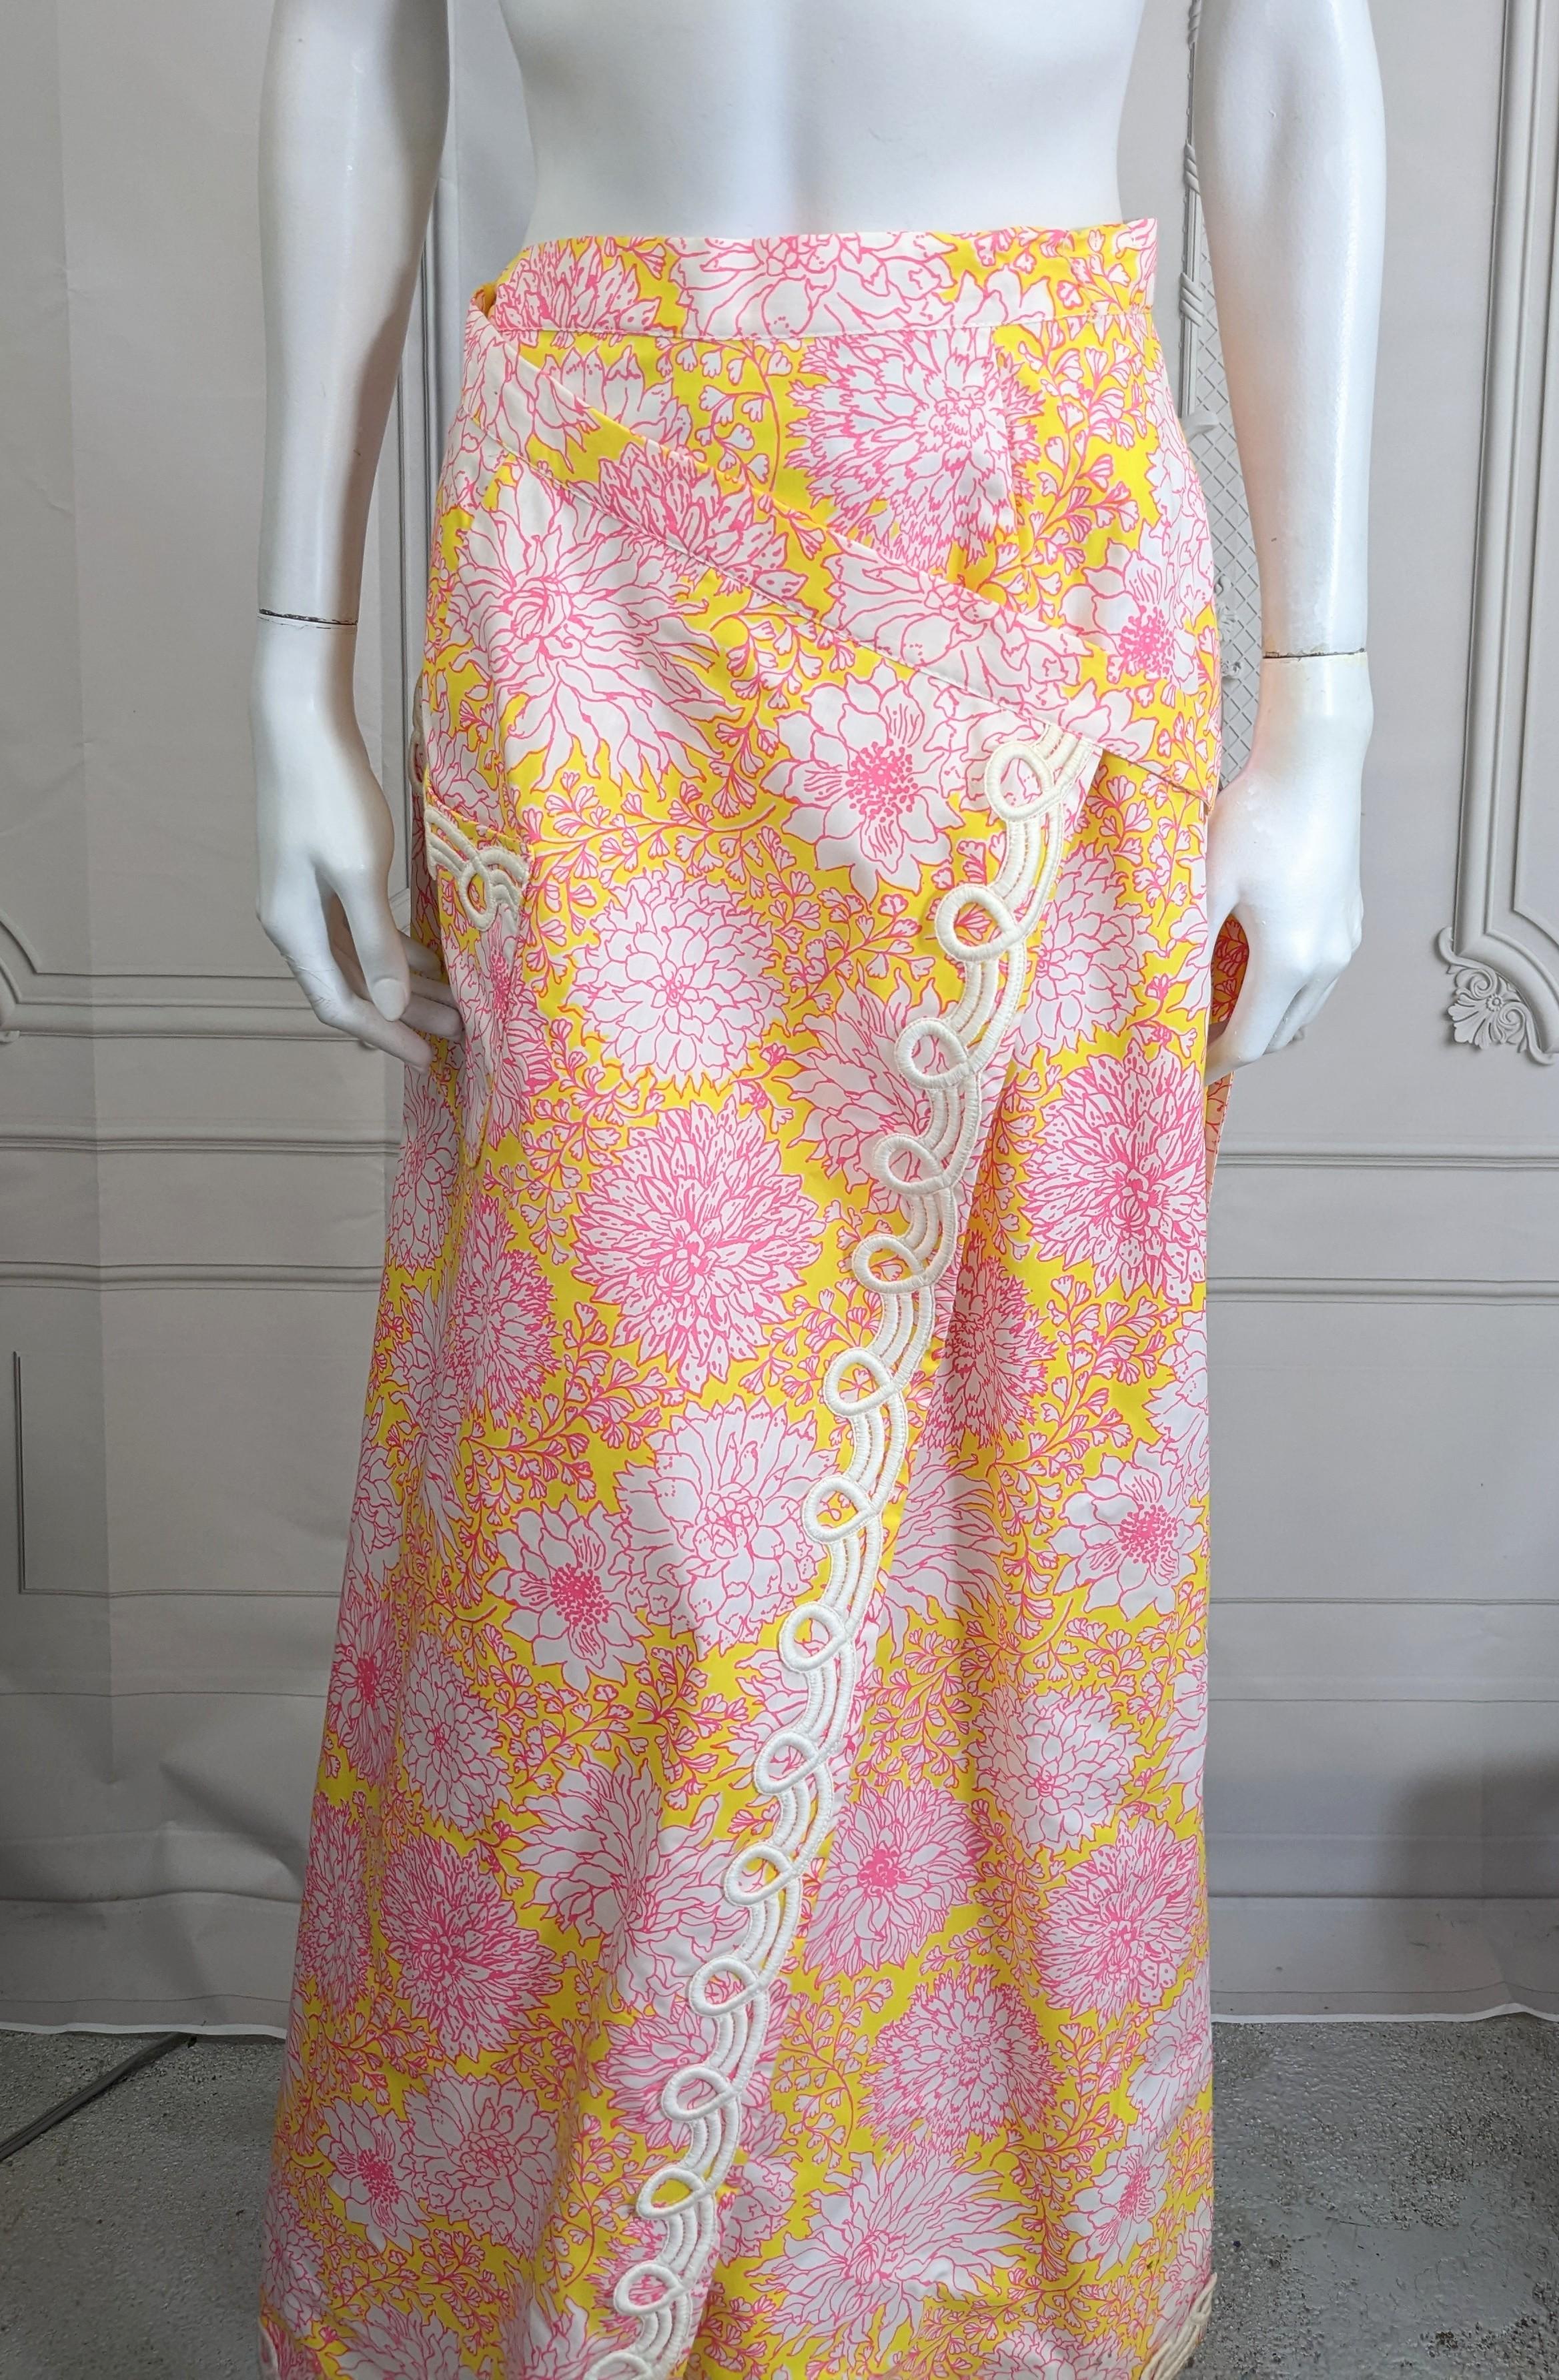 Lily Pulitzer Soutache Trimmed Wrap Skirt In Excellent Condition For Sale In New York, NY